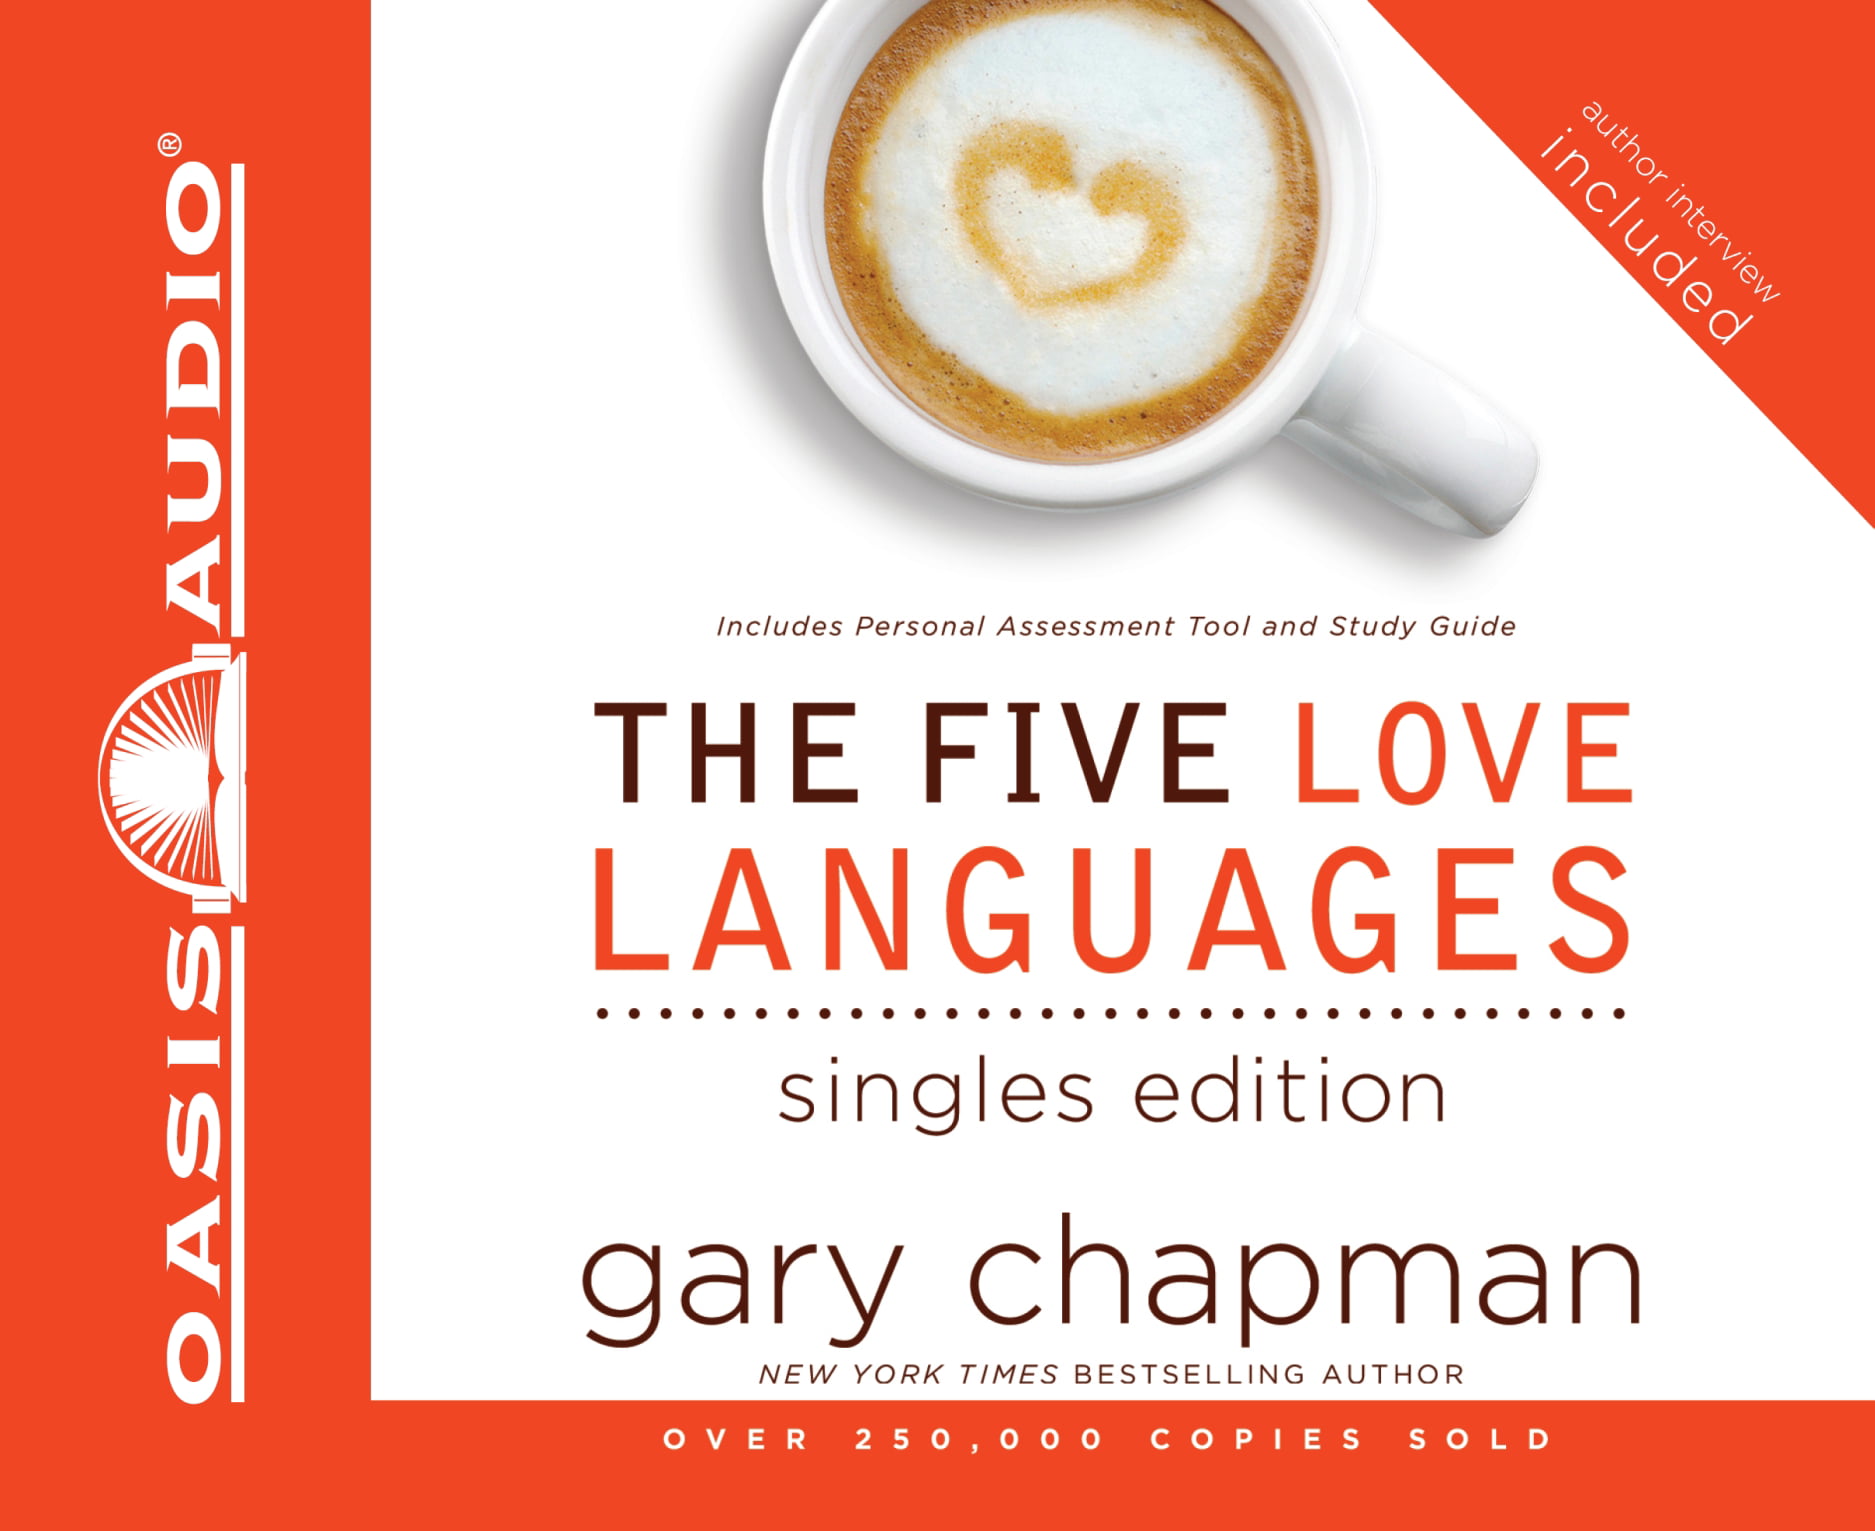 Buy The Five Love Languages: Singles Edition at Walmart.com.